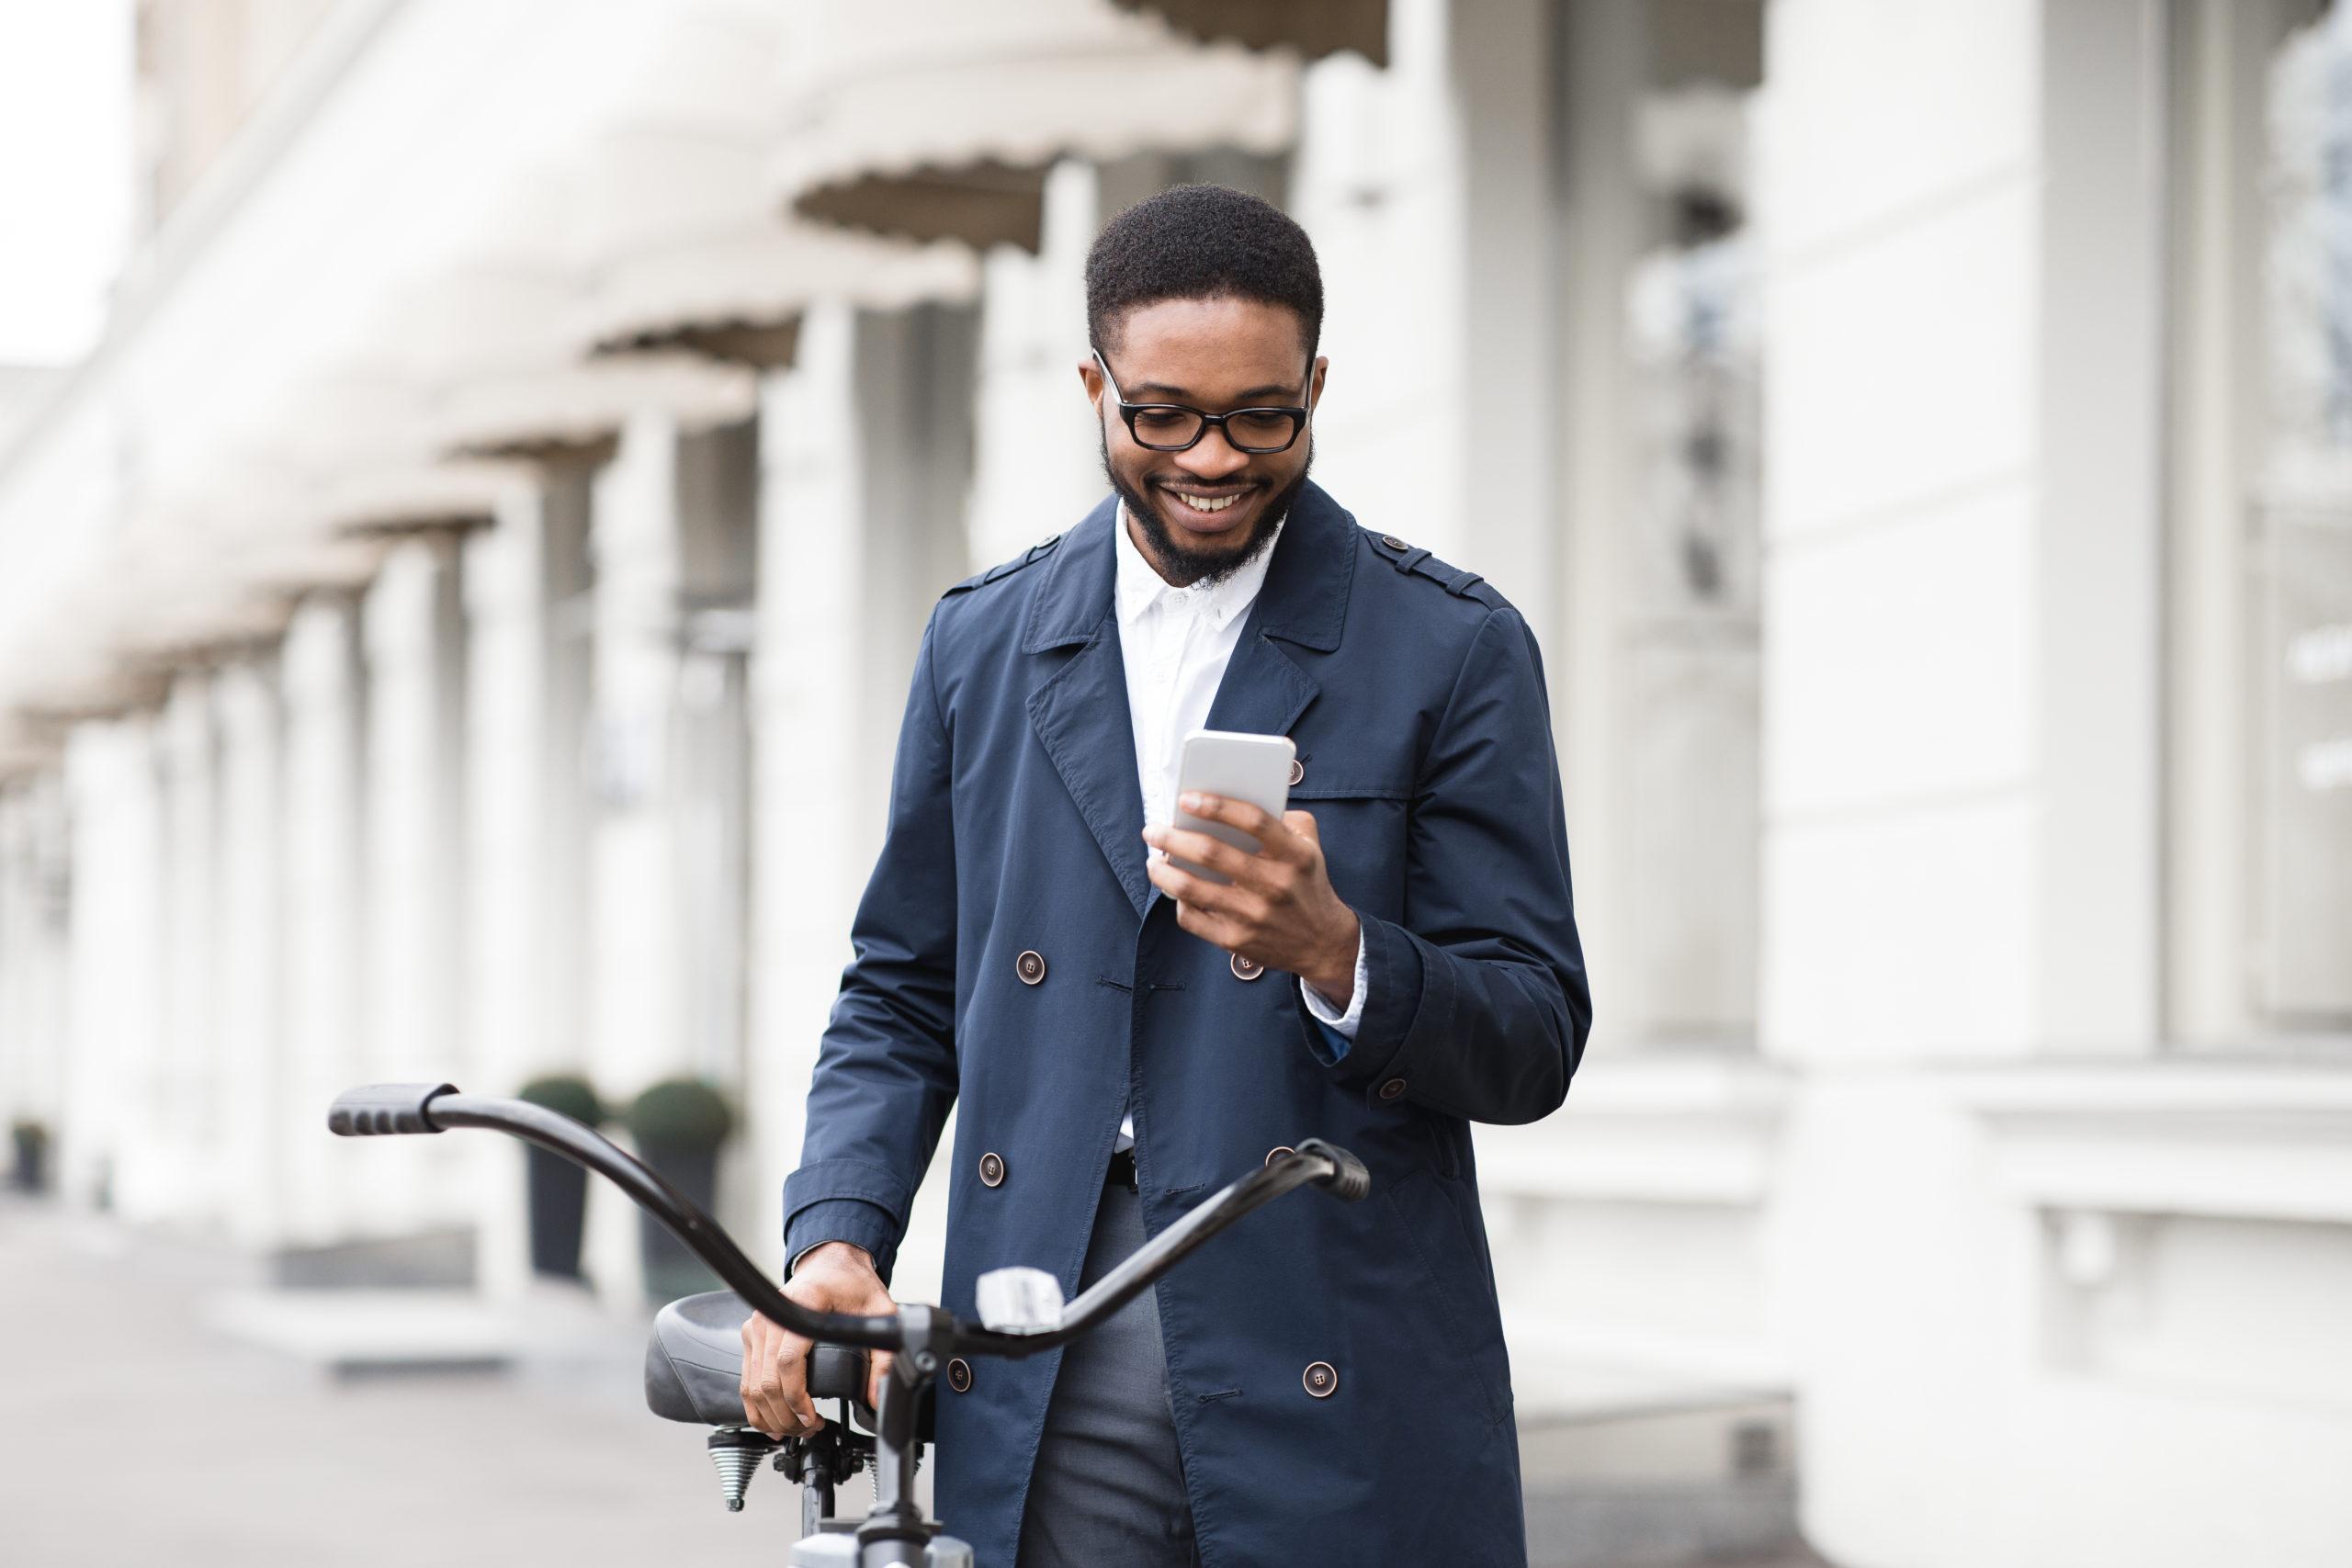 man holding bicycle in front of building on his phone